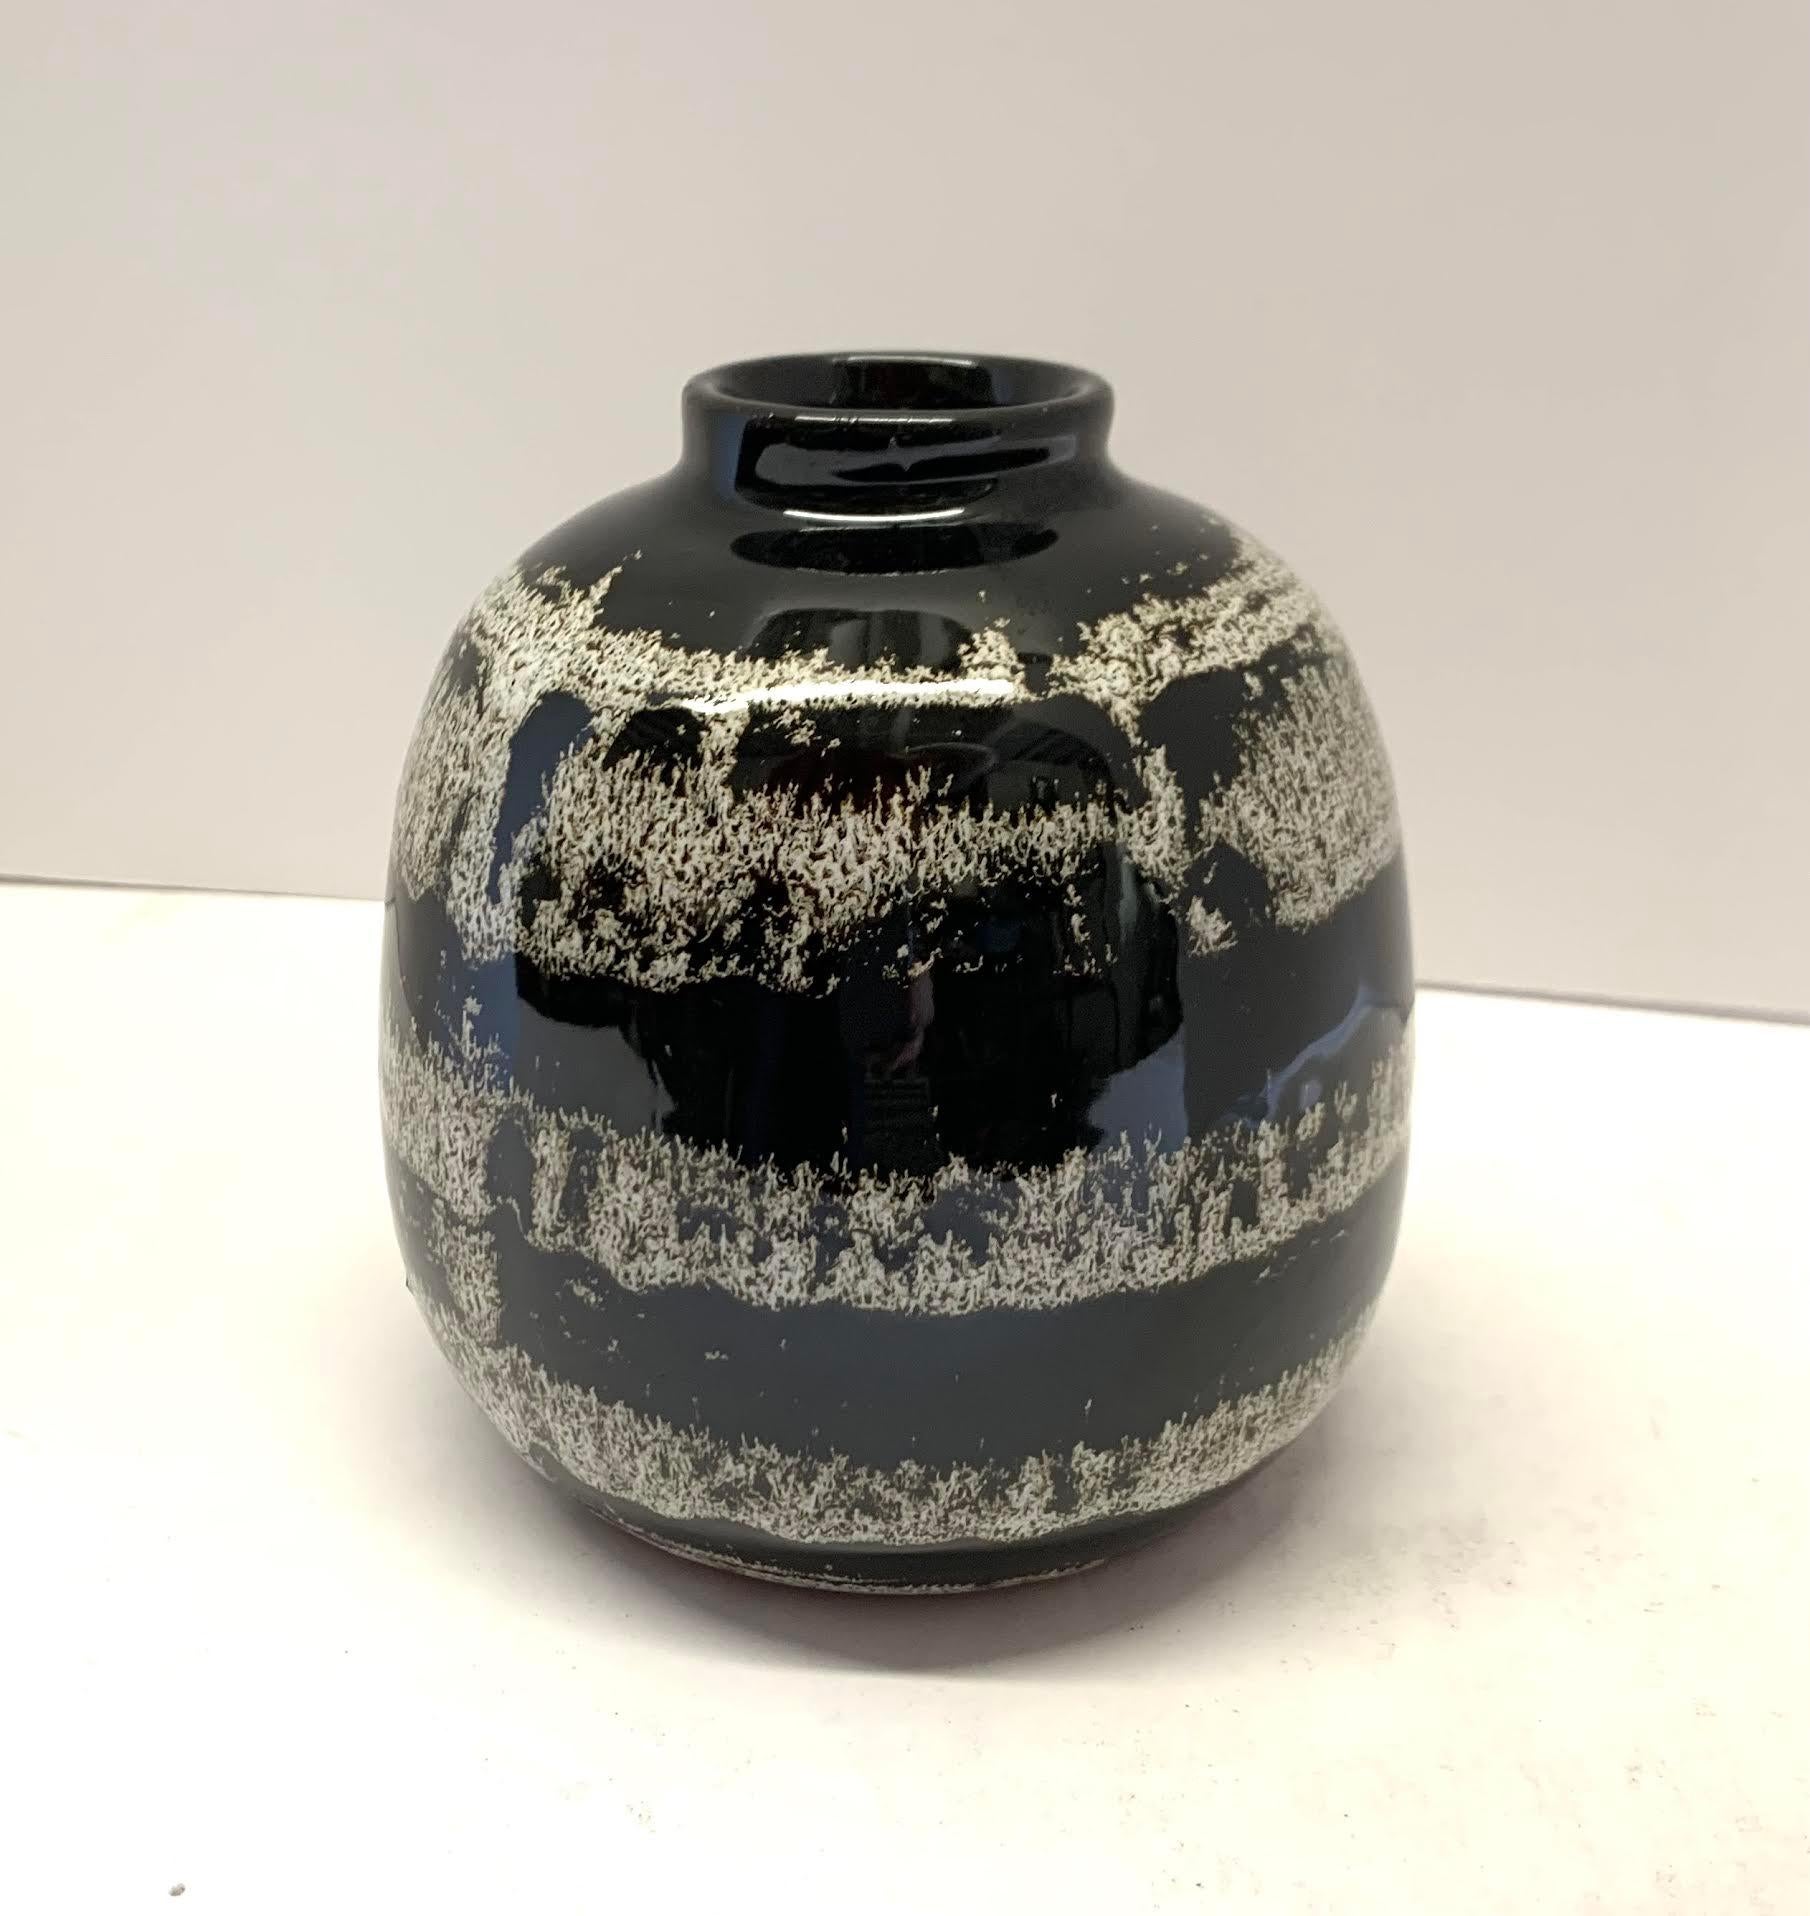 Contemporary Chinese speckled black and white glaze with a horizontal stripe.
Two are available and sold individually.